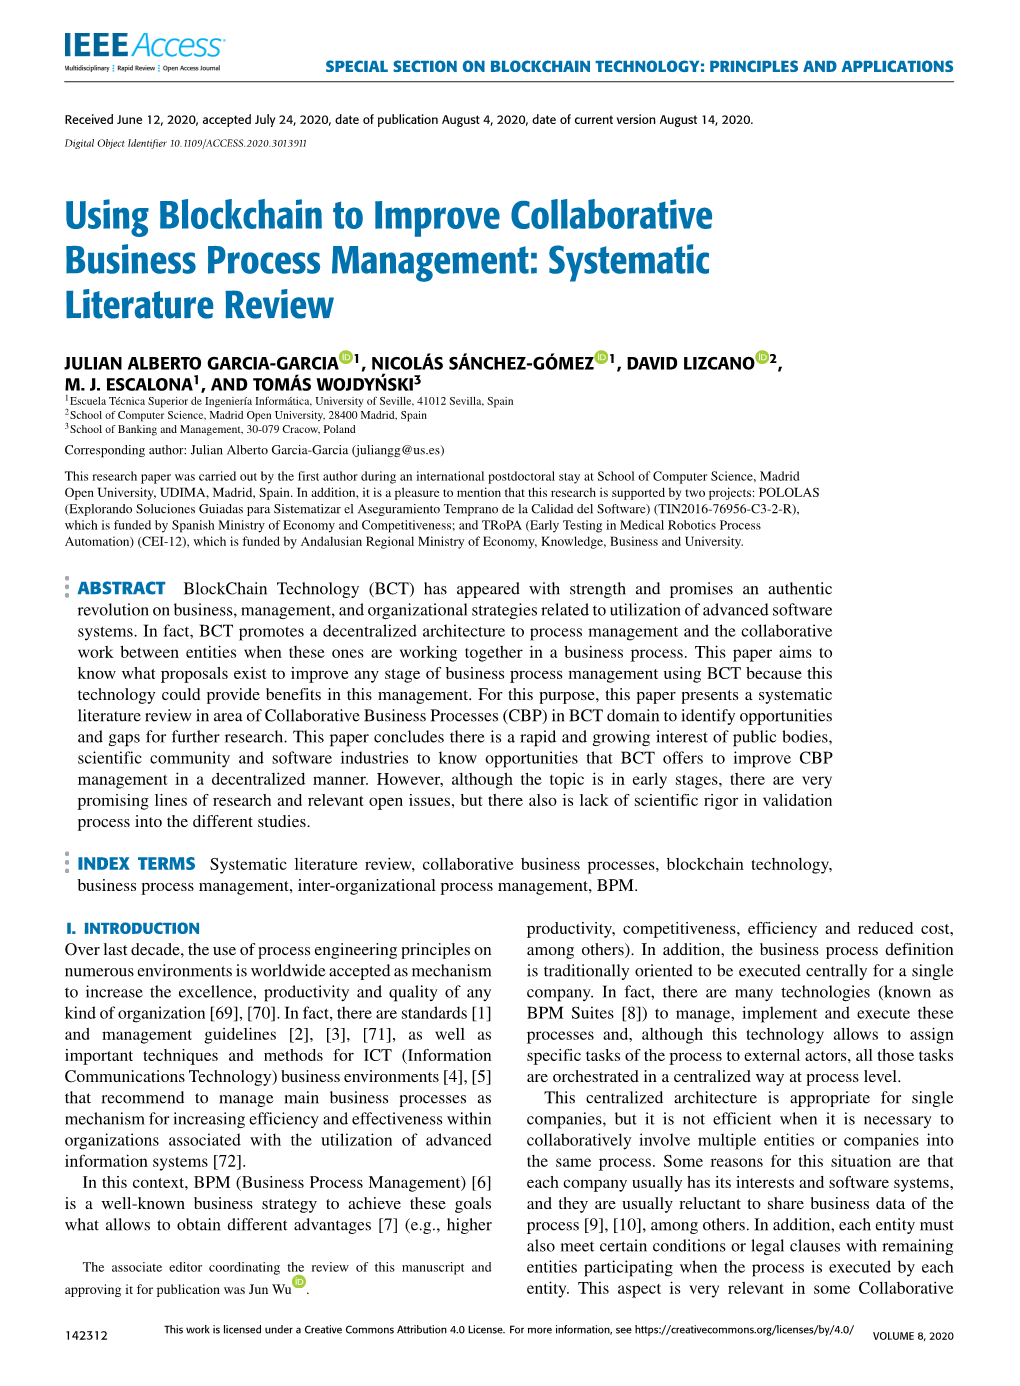 Using Blockchain to Improve Collaborative Business Process Management: Systematic Literature Review